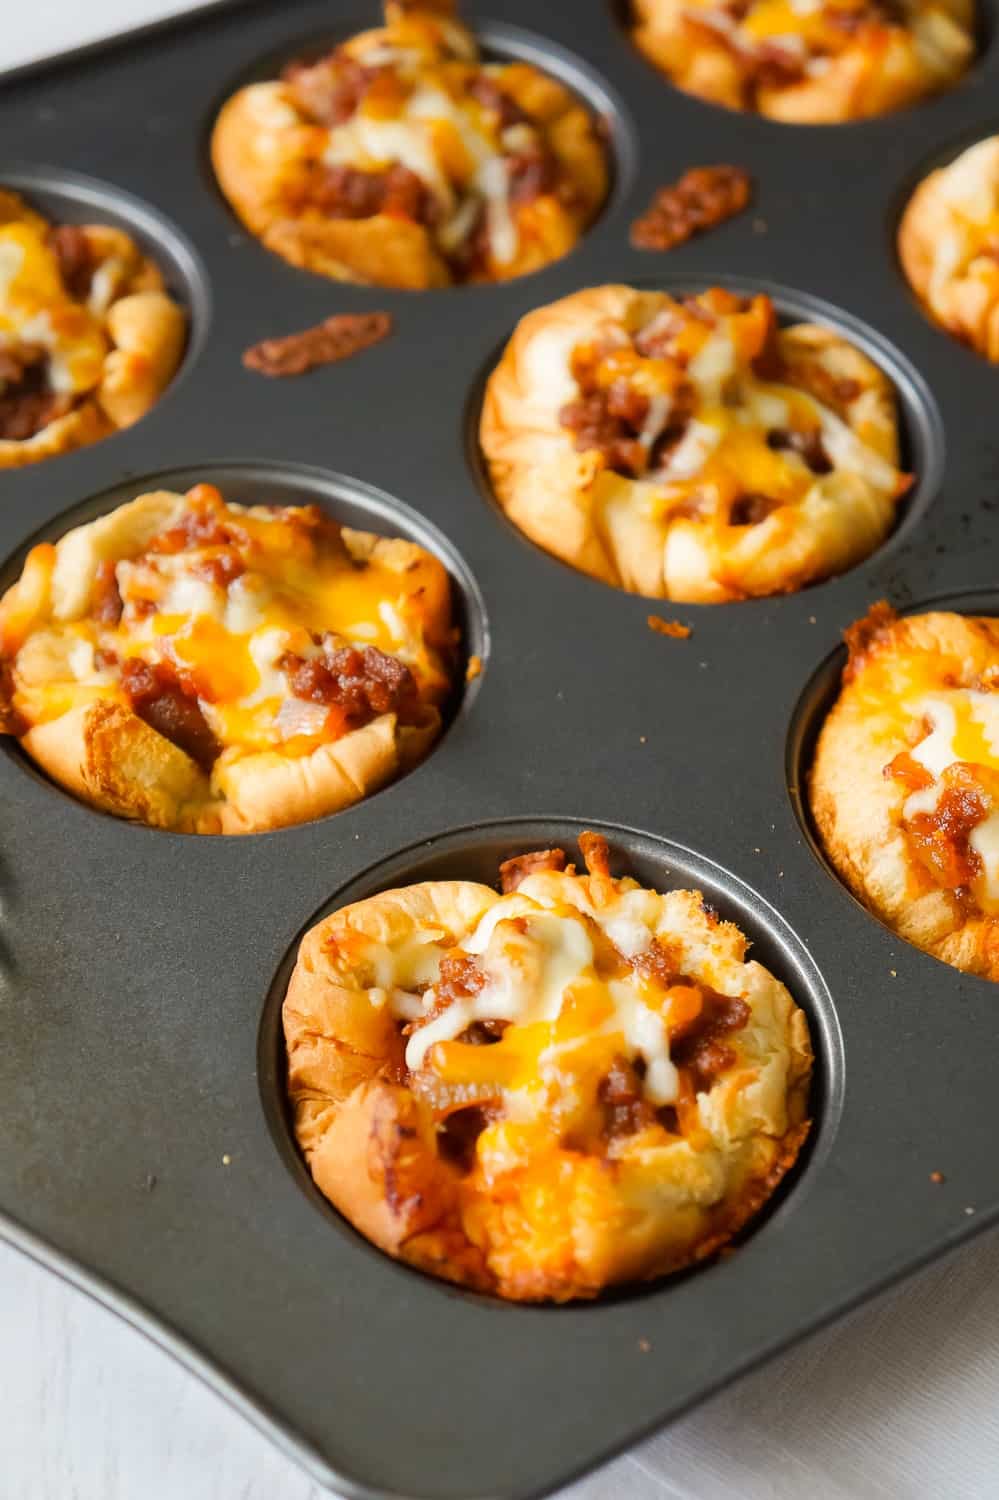 Sloppy Joe Cups are an easy recipe perfect for a fun weeknight dinner or to serve at a party. These hamburger bun cups are filled with ground beef tossed in homemade sloppy joe sauce.